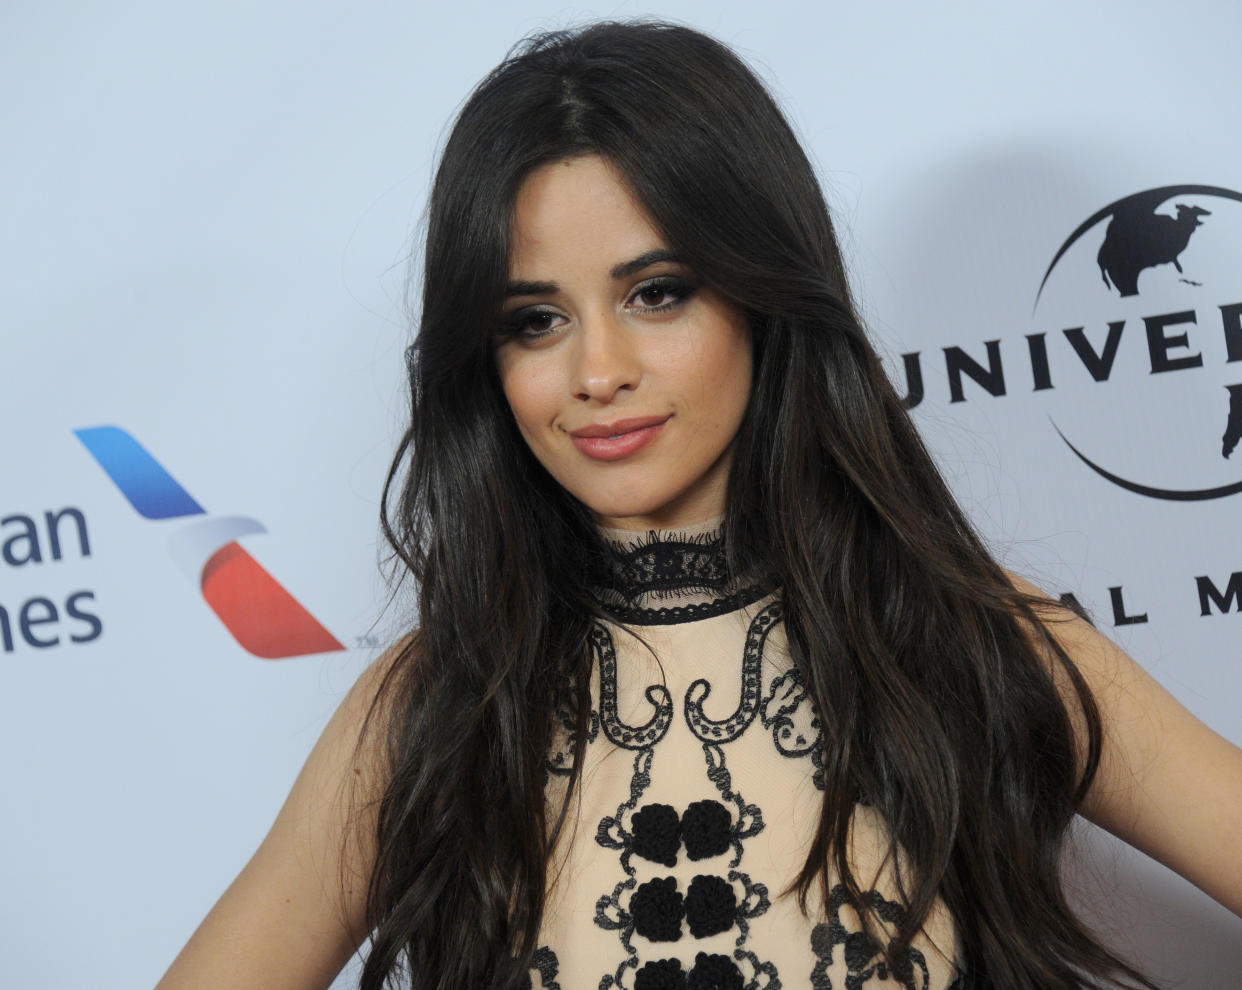 Camila Cabello reveals she felt sexualized at too young an age in Fifth Harmony